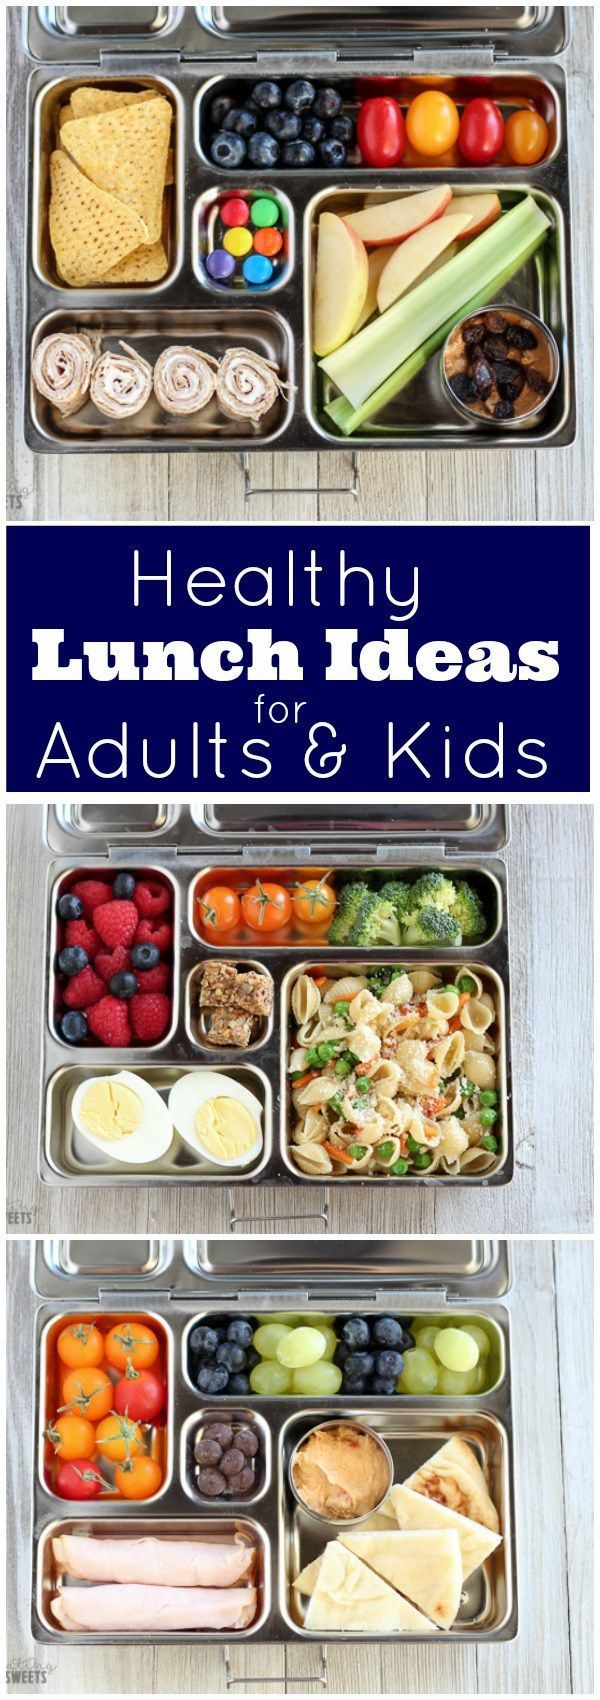 Healthy Lunch Ideas for Kids and Adults